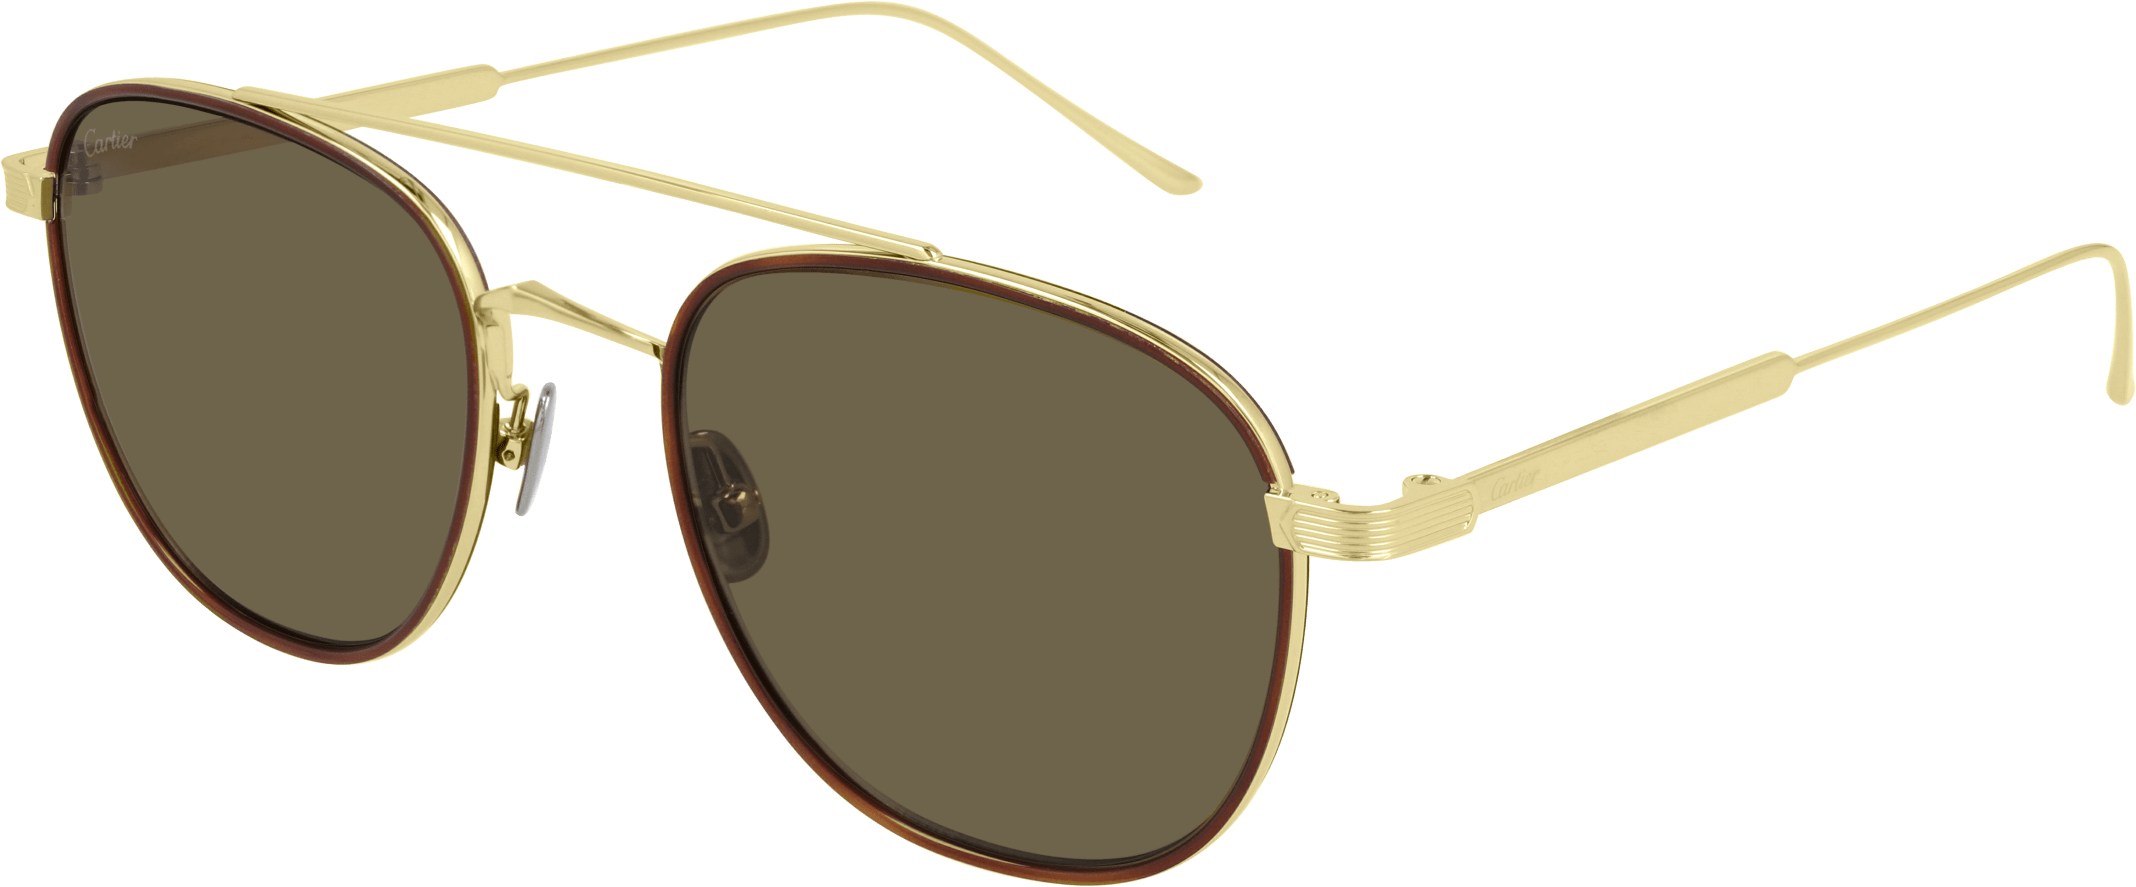 Color_CT0251S-008 - GOLD - BROWN - AR (ANTI REFLECTIVE)